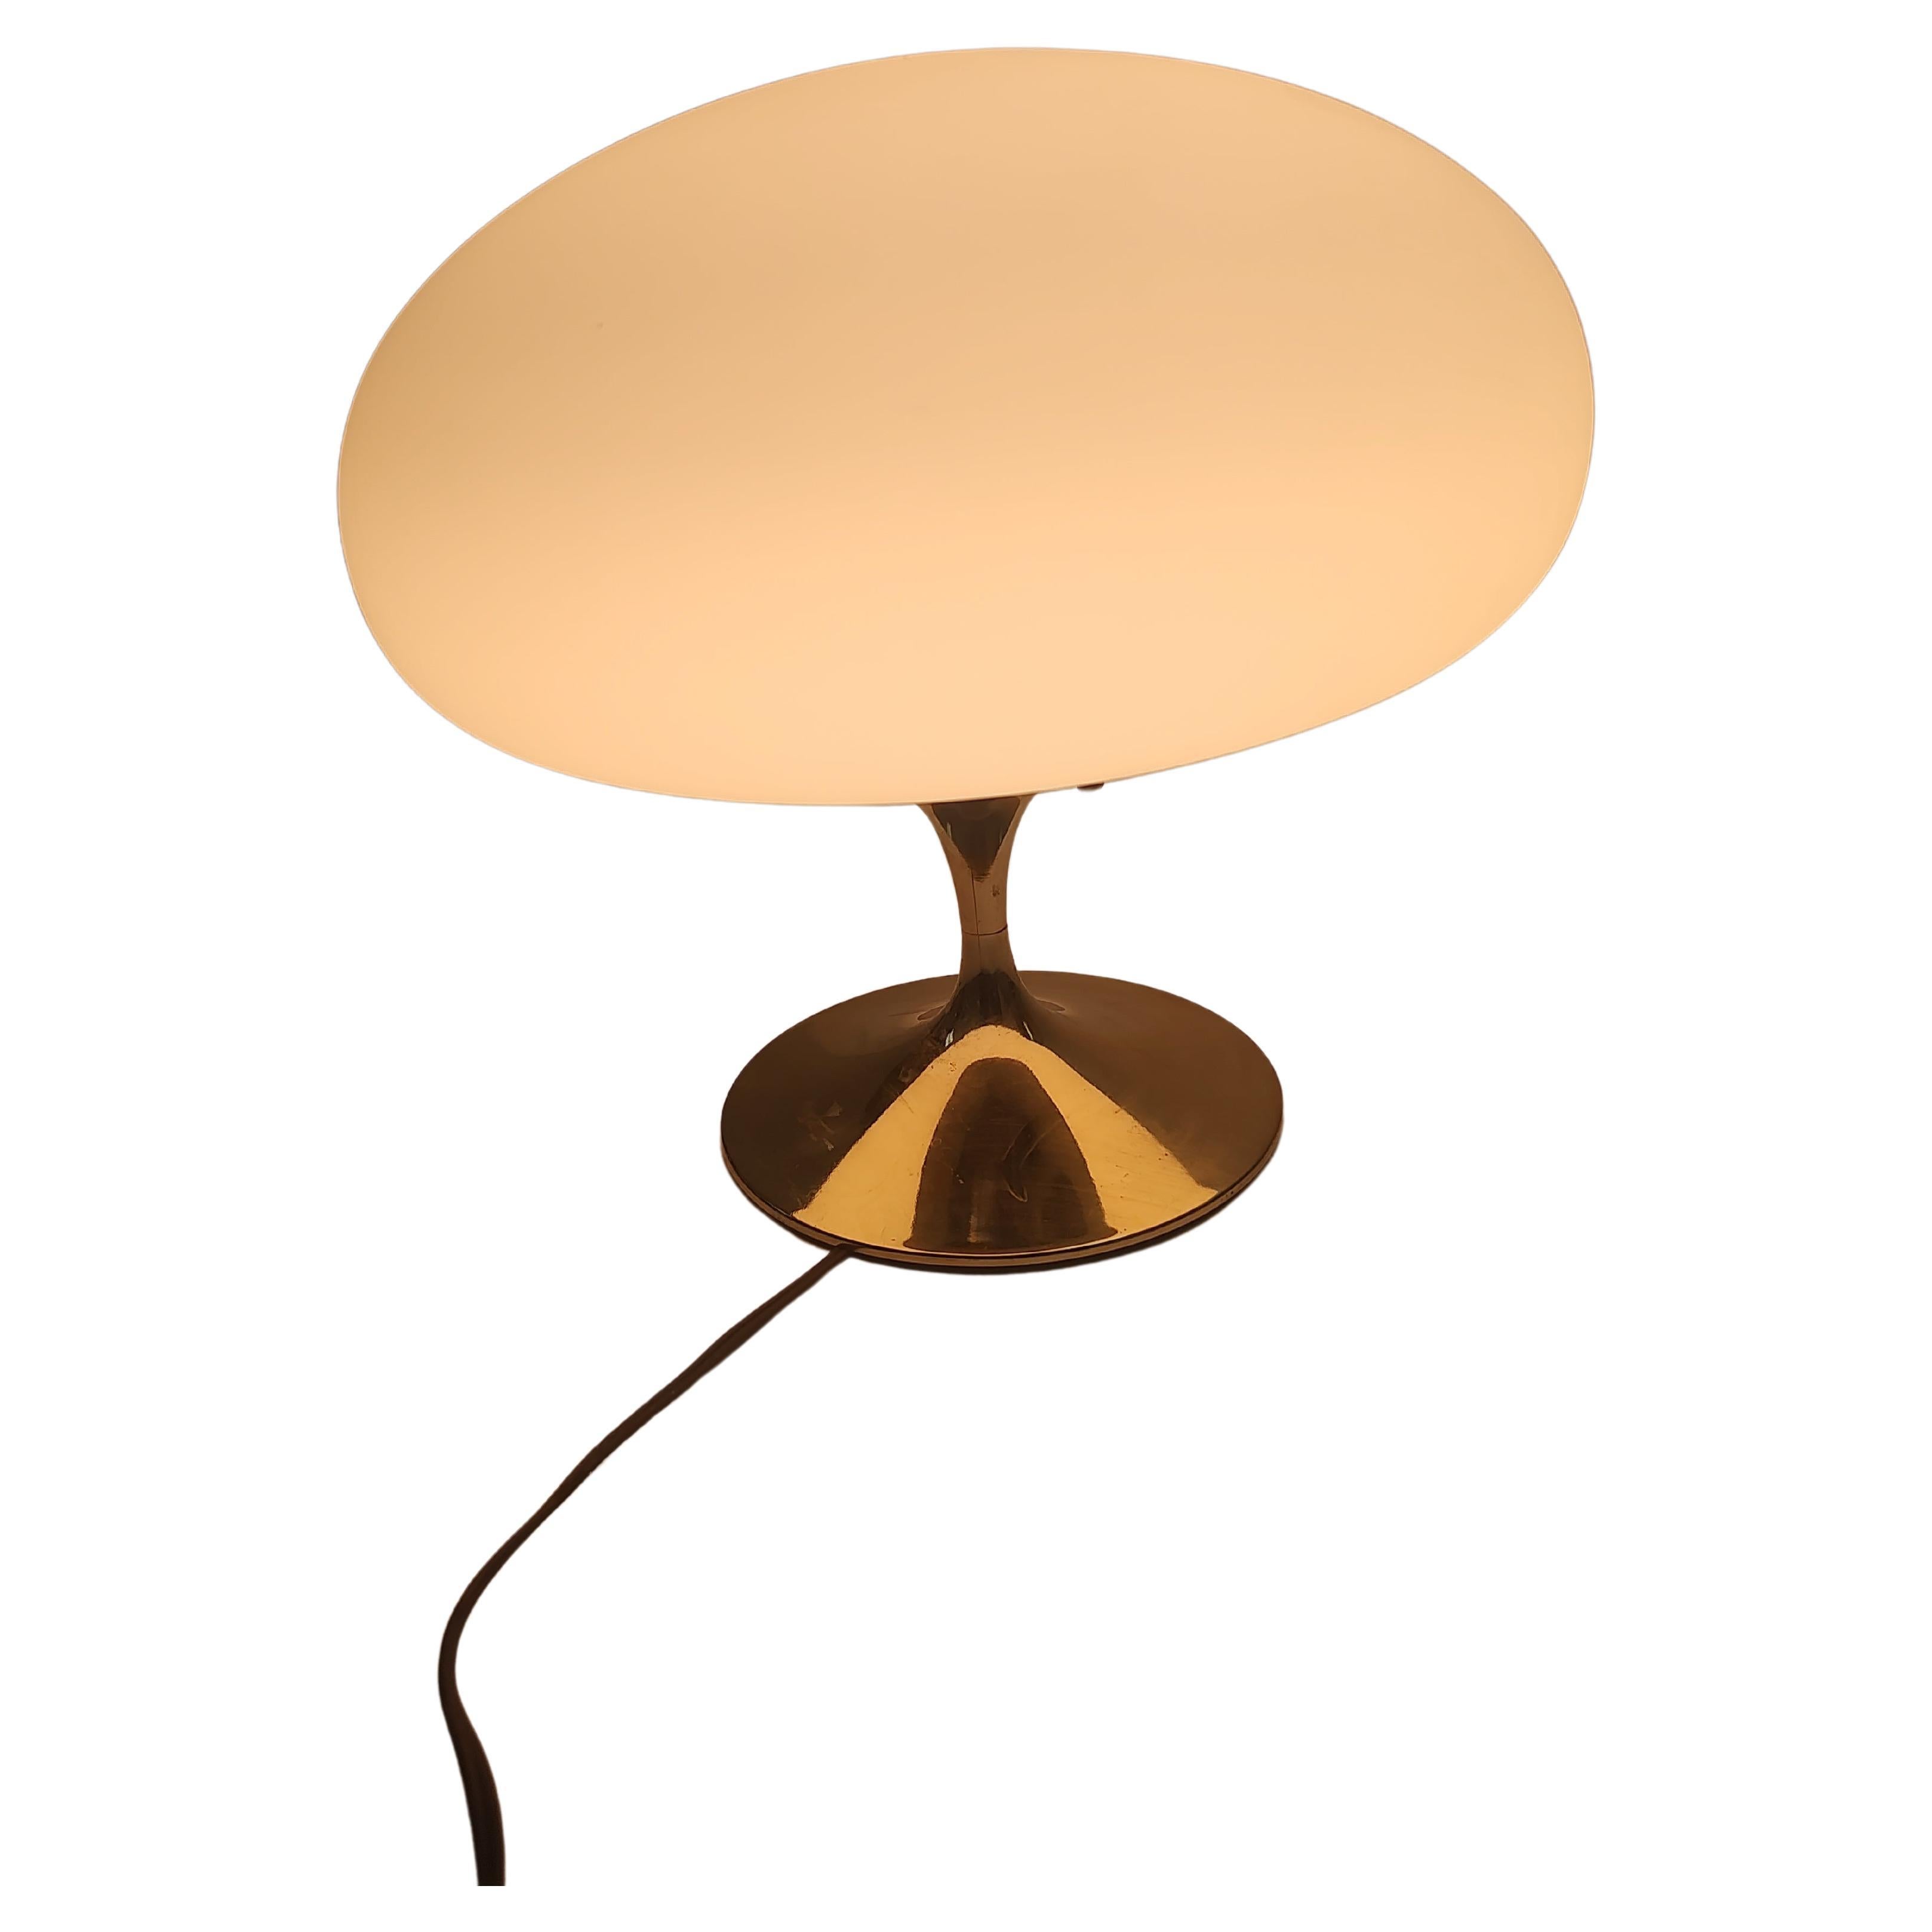 Simple yet elegant mushroom lamp attributed to the Laurel Lamp Company c1965. Milk Glass shade which sits atop a brass base with a 3-way switch. In excellent vintage condition with minimal wear. Shade is chip and crack free. We have other size